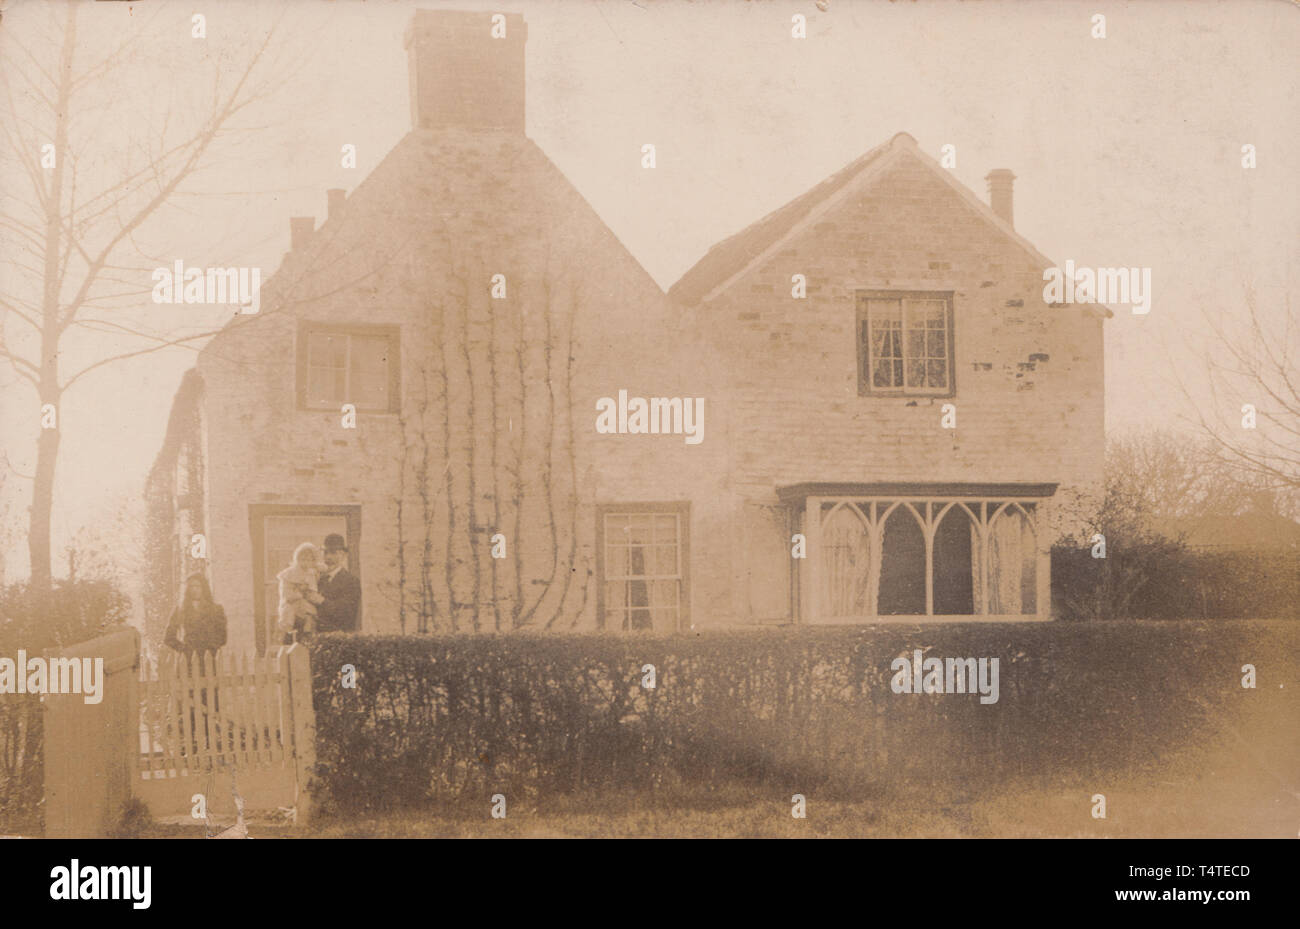 Vintage Photographic Postcard Showing an Historic British Detached House With a Father and His Two Children in The Front Garden. Stock Photo